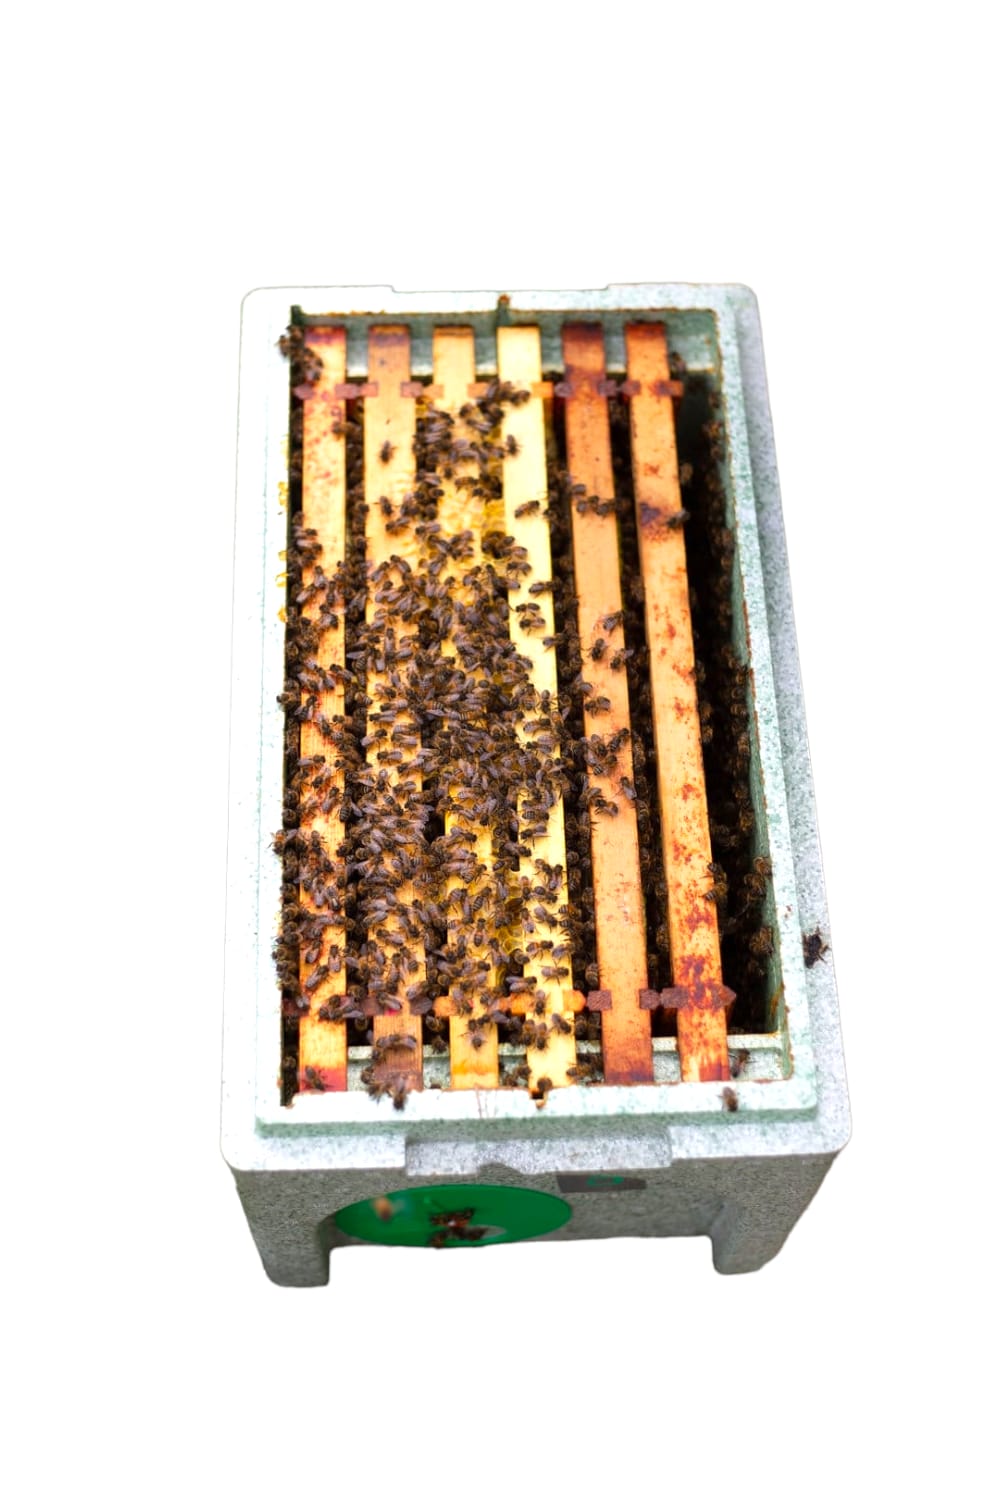 National Nuc of Bees - Donagh Bees